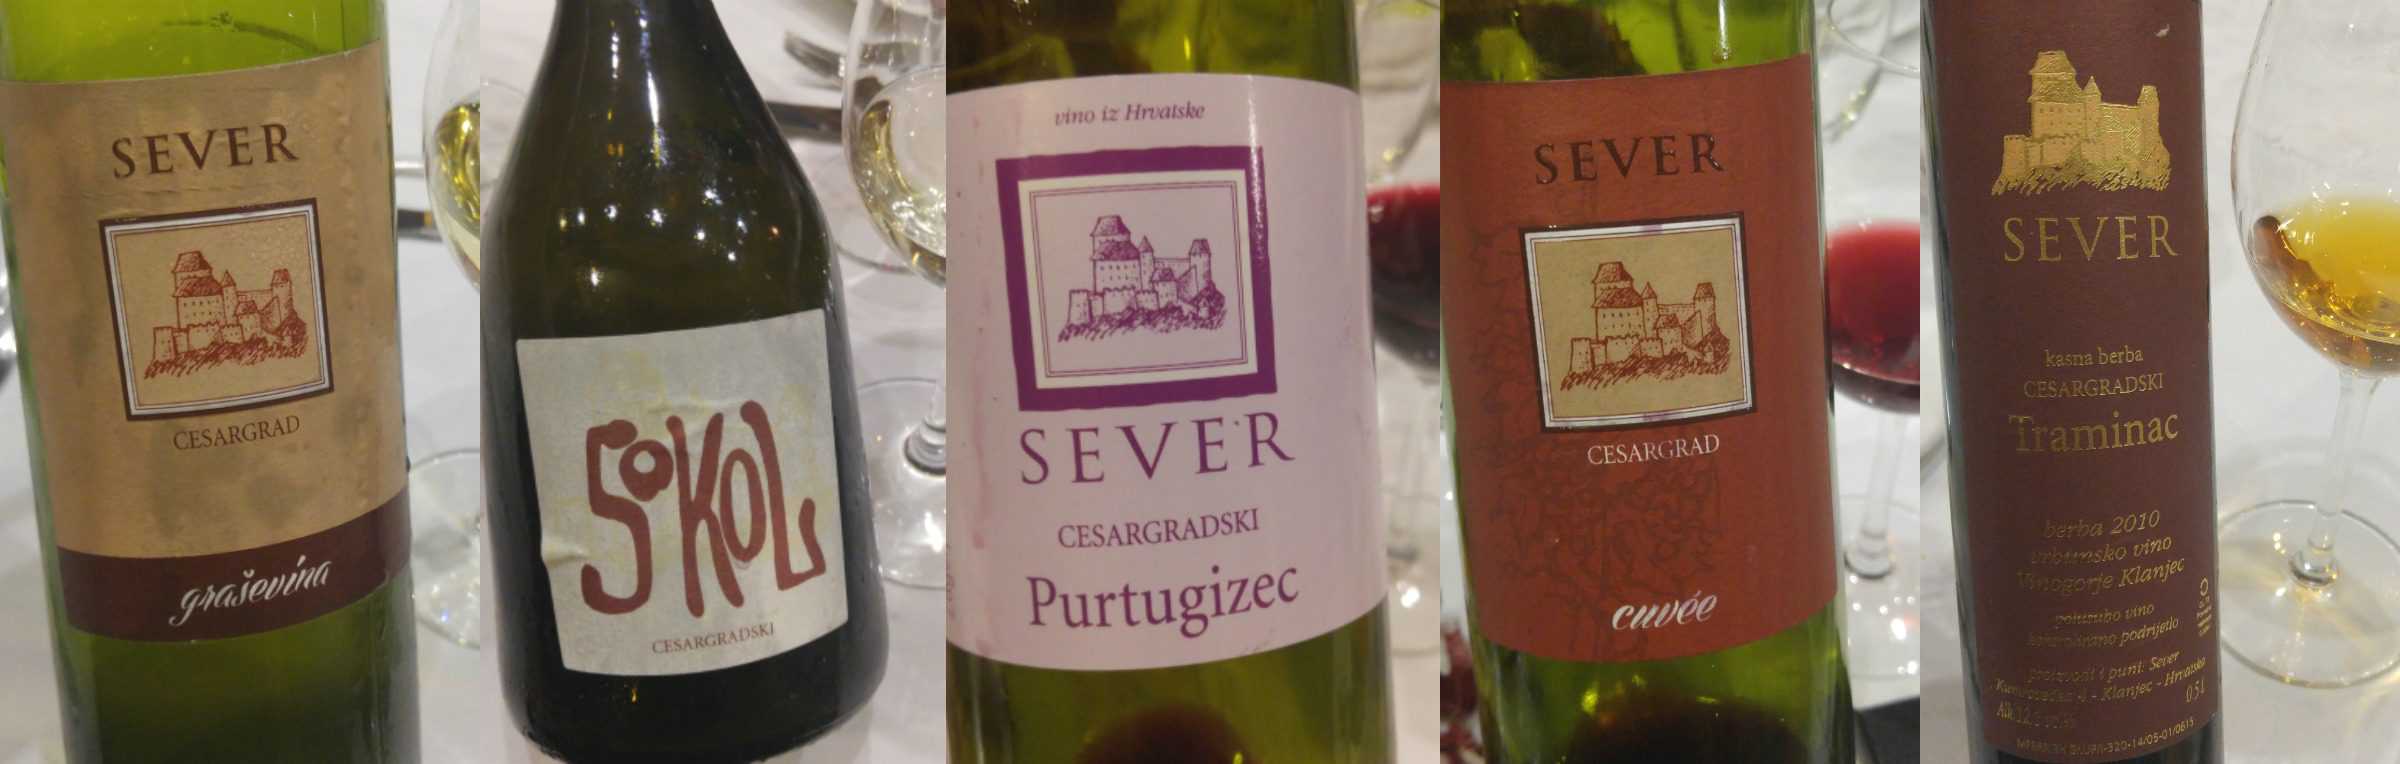 THE SEVER WINERY wine tasting